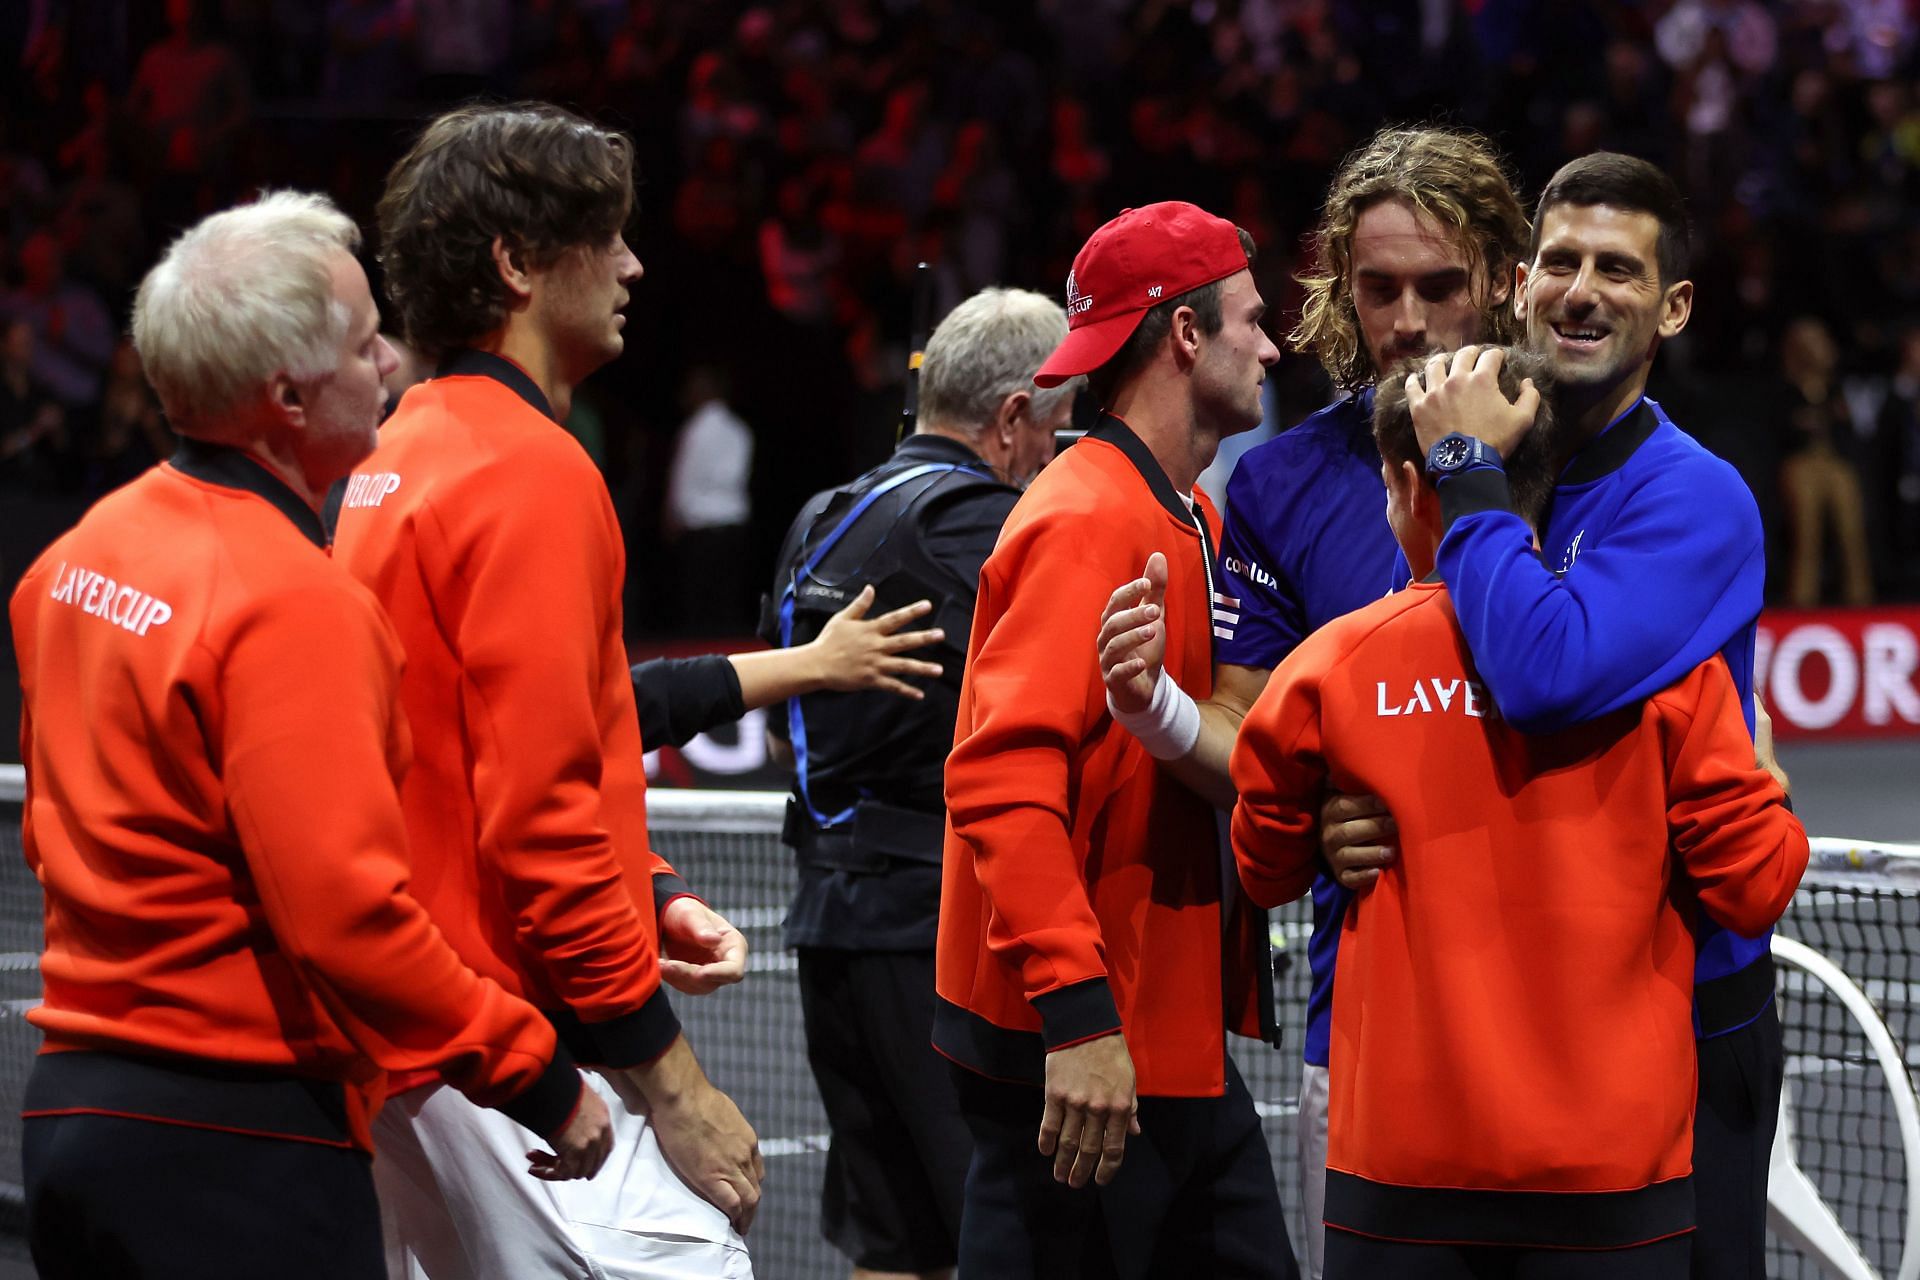 Diego Schwartzman of Team World and Novak Djokovic of Team Europe at the 2022 Laver Cup - Day Three